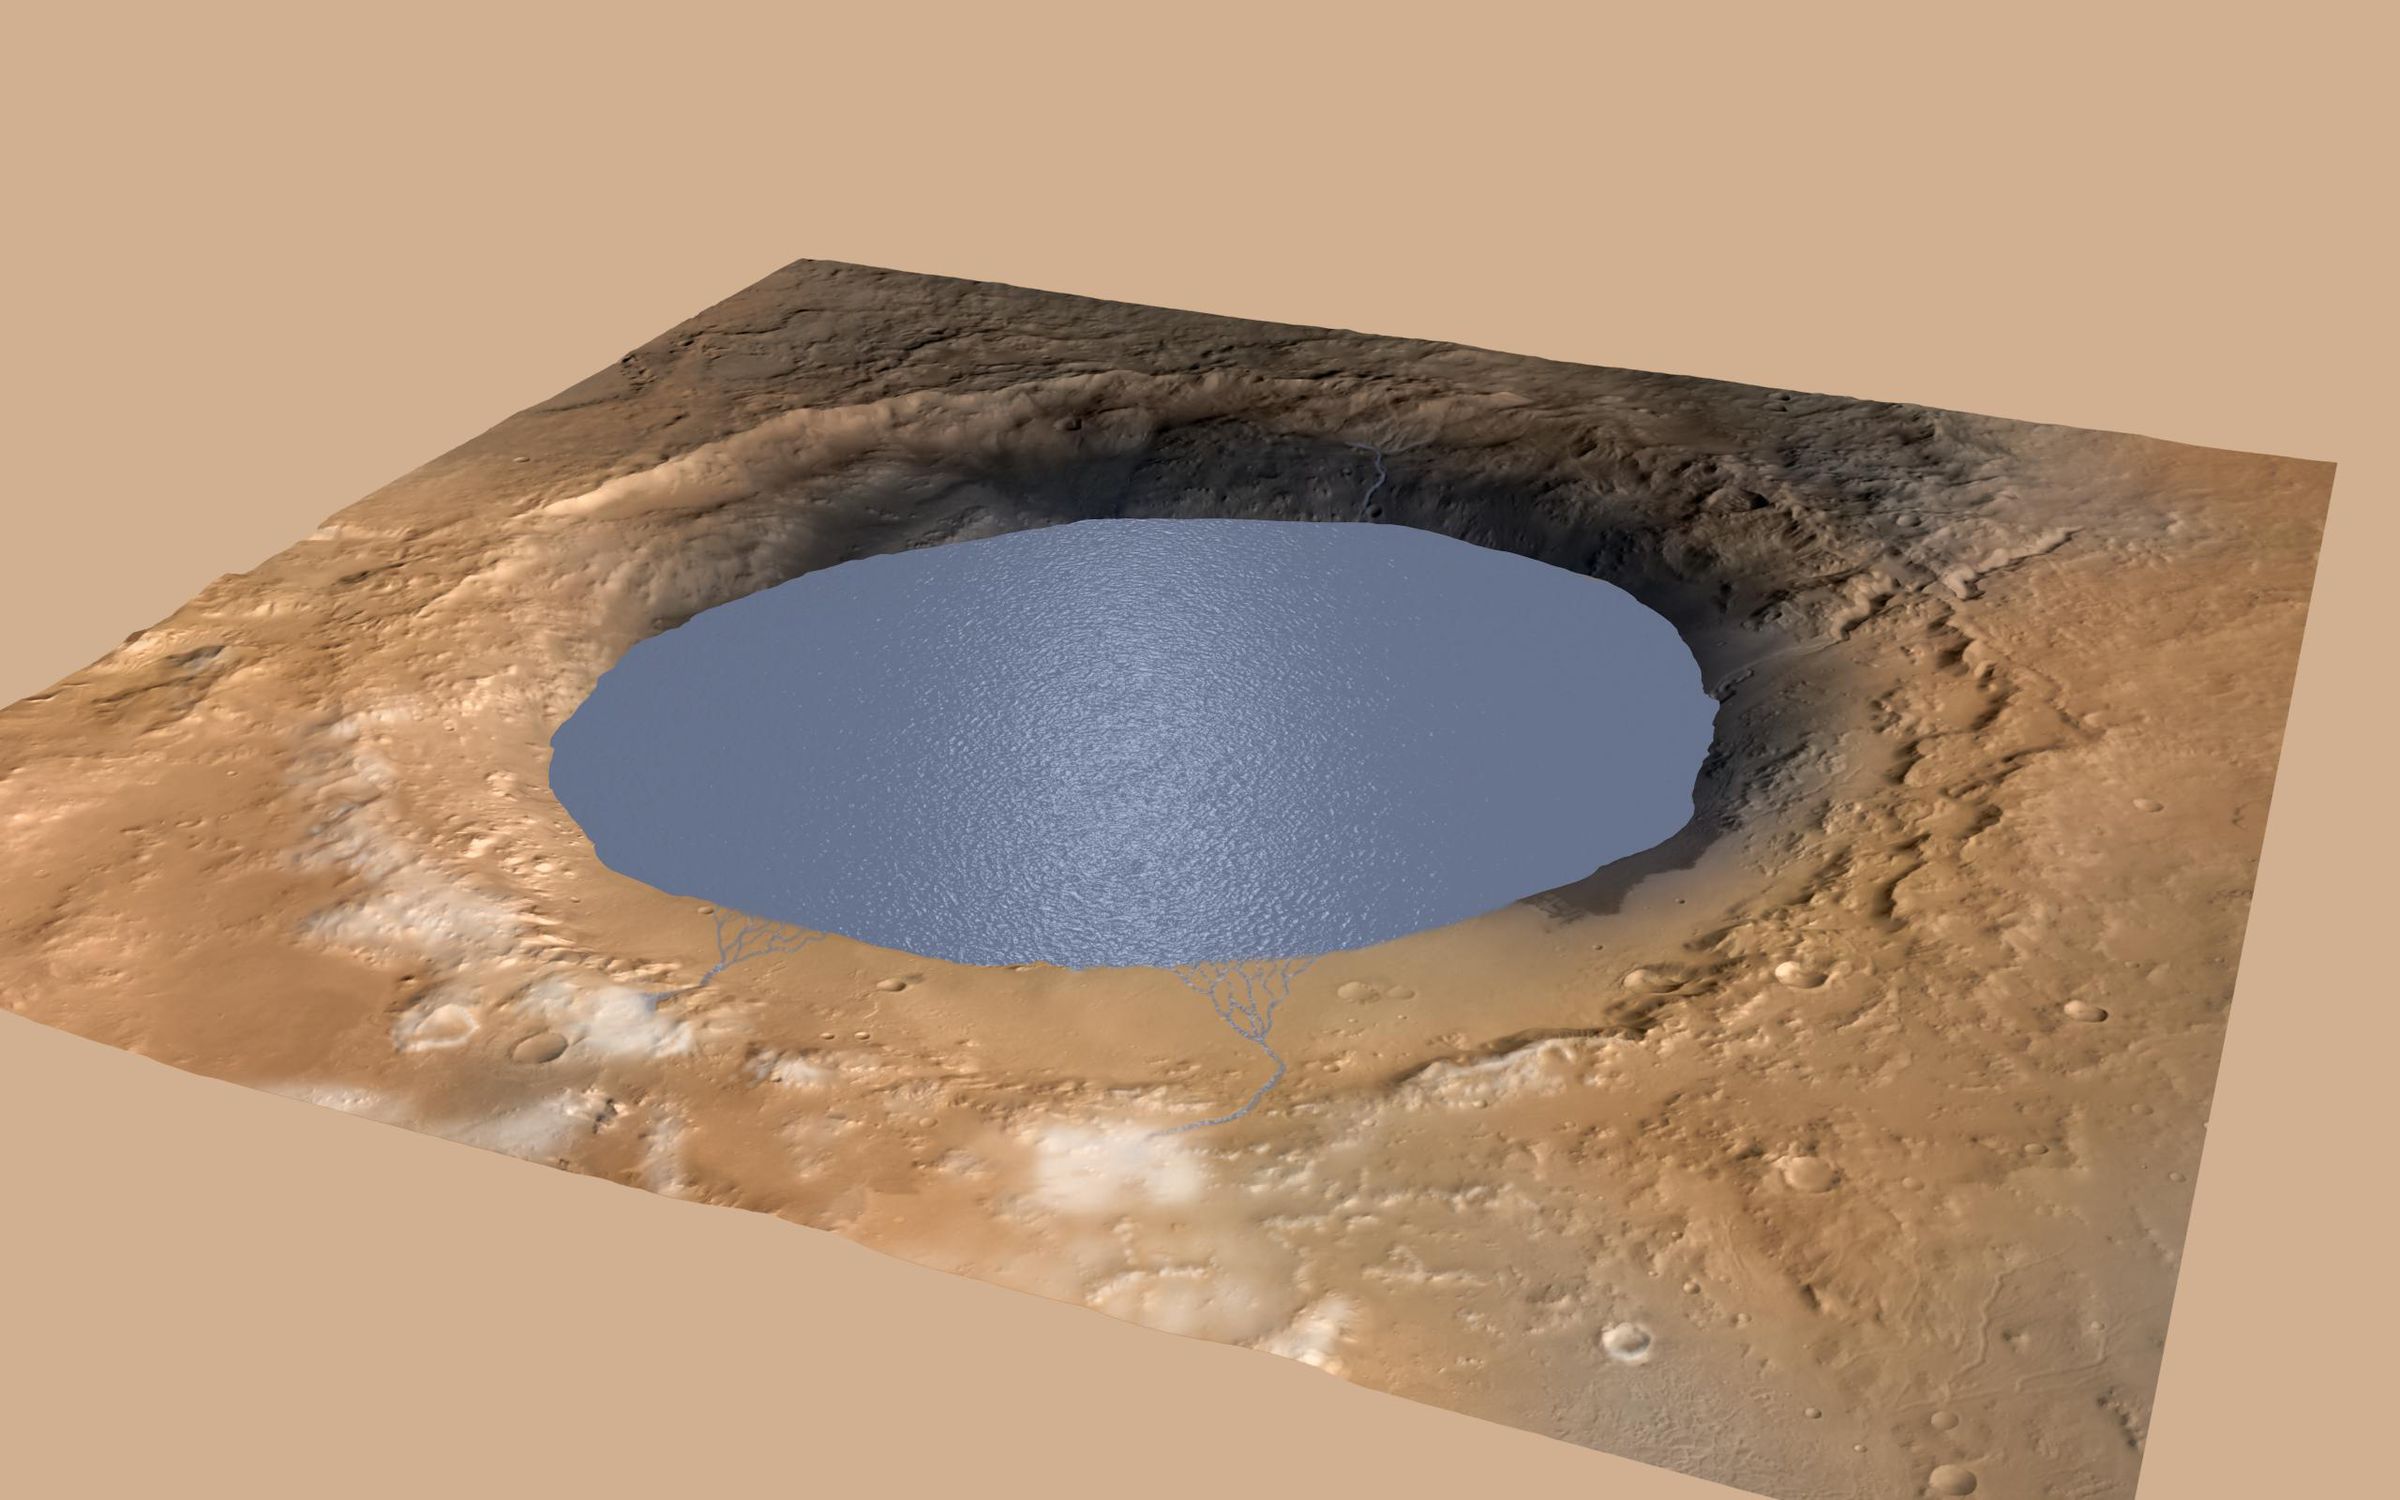 A simulation depicts a lake partially filling Mars Gale Crater.